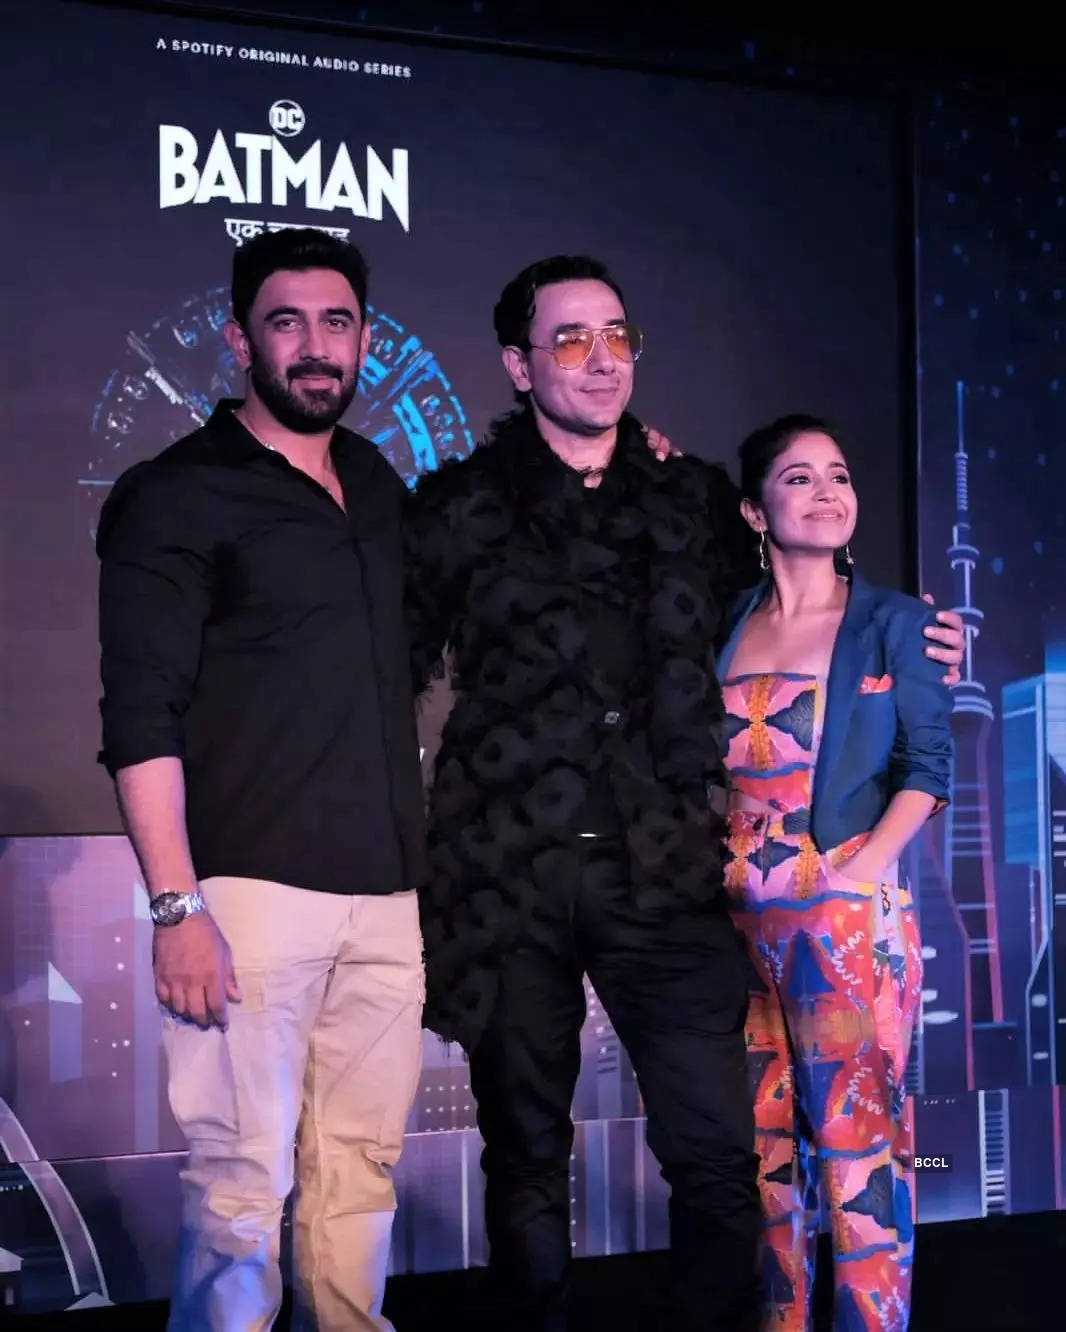 In pictures: The epic making of an epic podcast: Behind the scenes of ‘Batman Ek Chakravyuh’